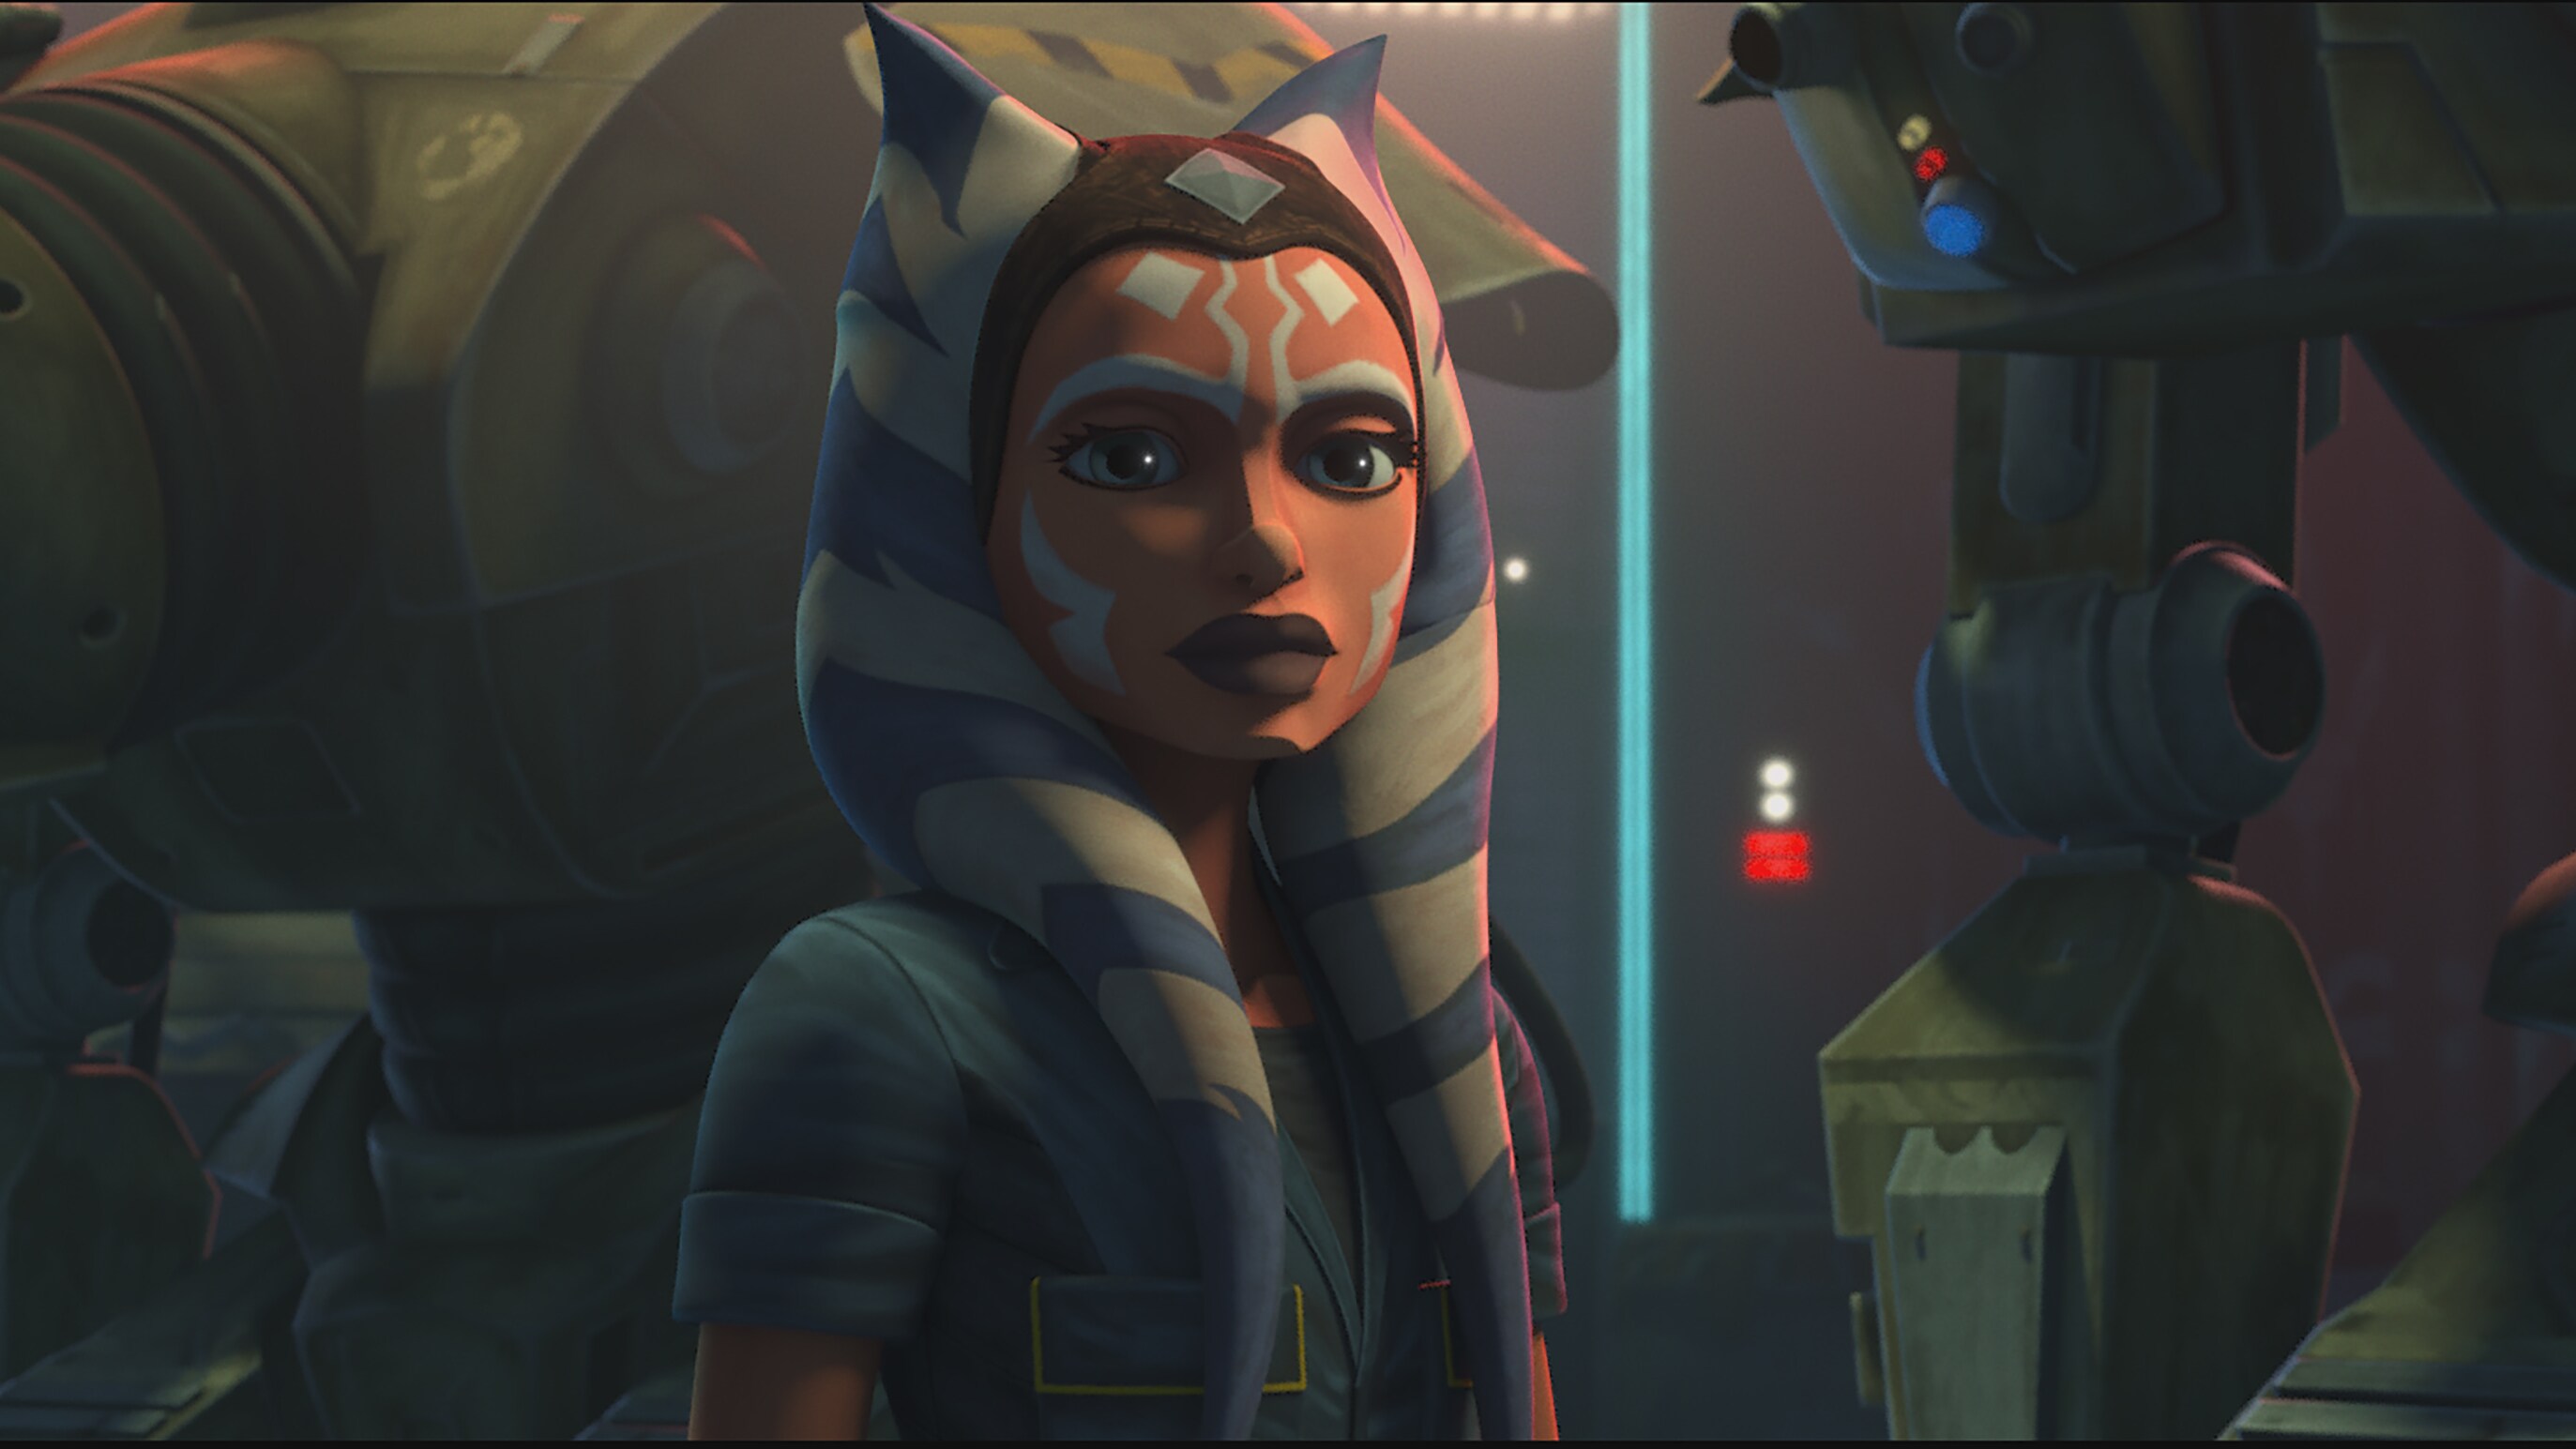 Ahsoka Tano finds herself stranded in the underworld of Coruscant in STAR WARS: THE CLONE WARS, exclusively on Disney+.